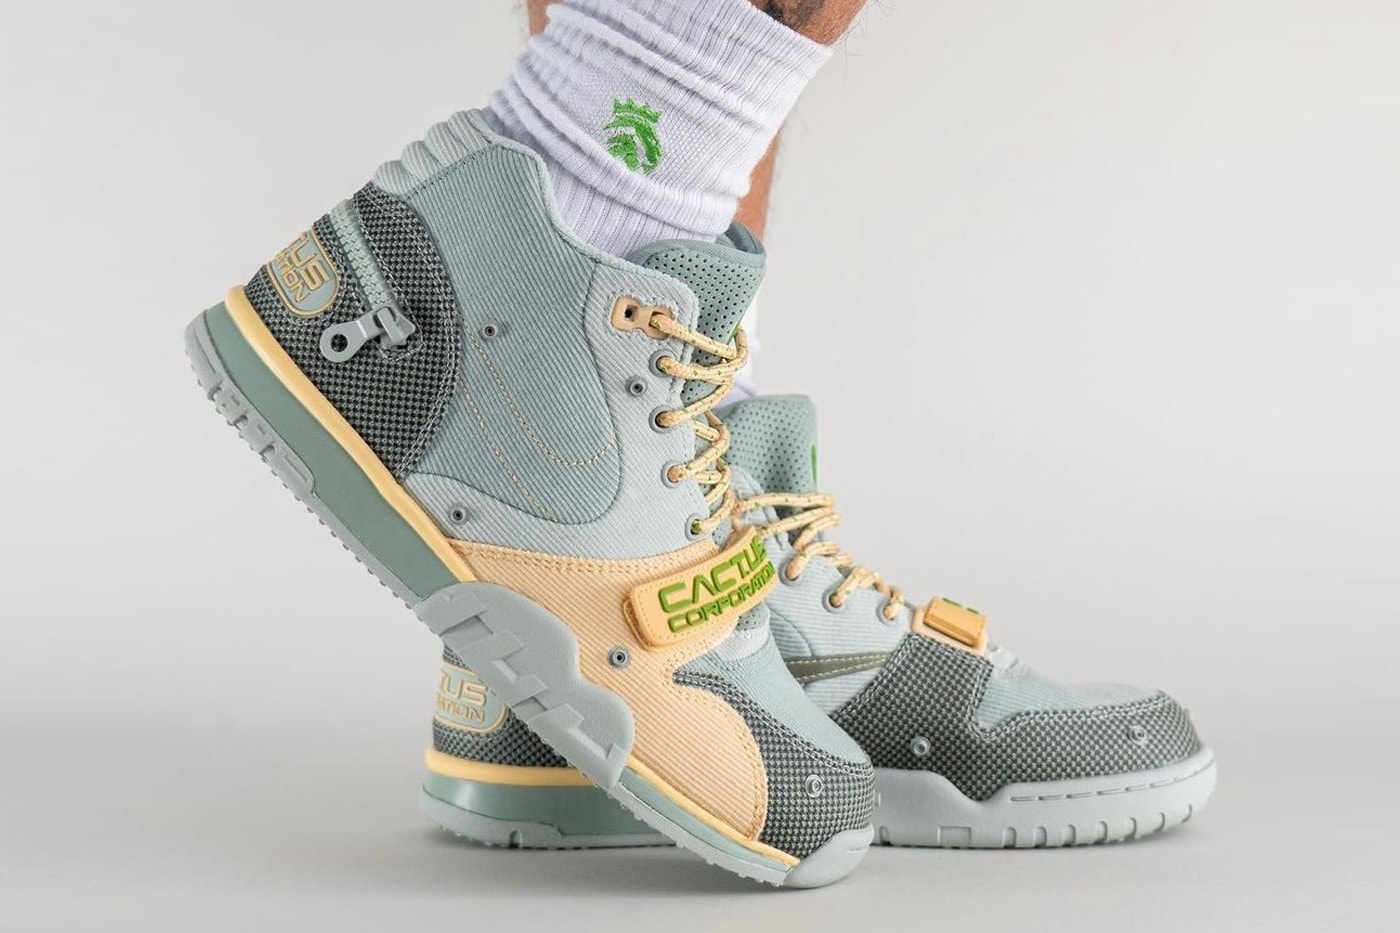 Travis Scott's Nike Air Trainer 1 Collab to Release This Month